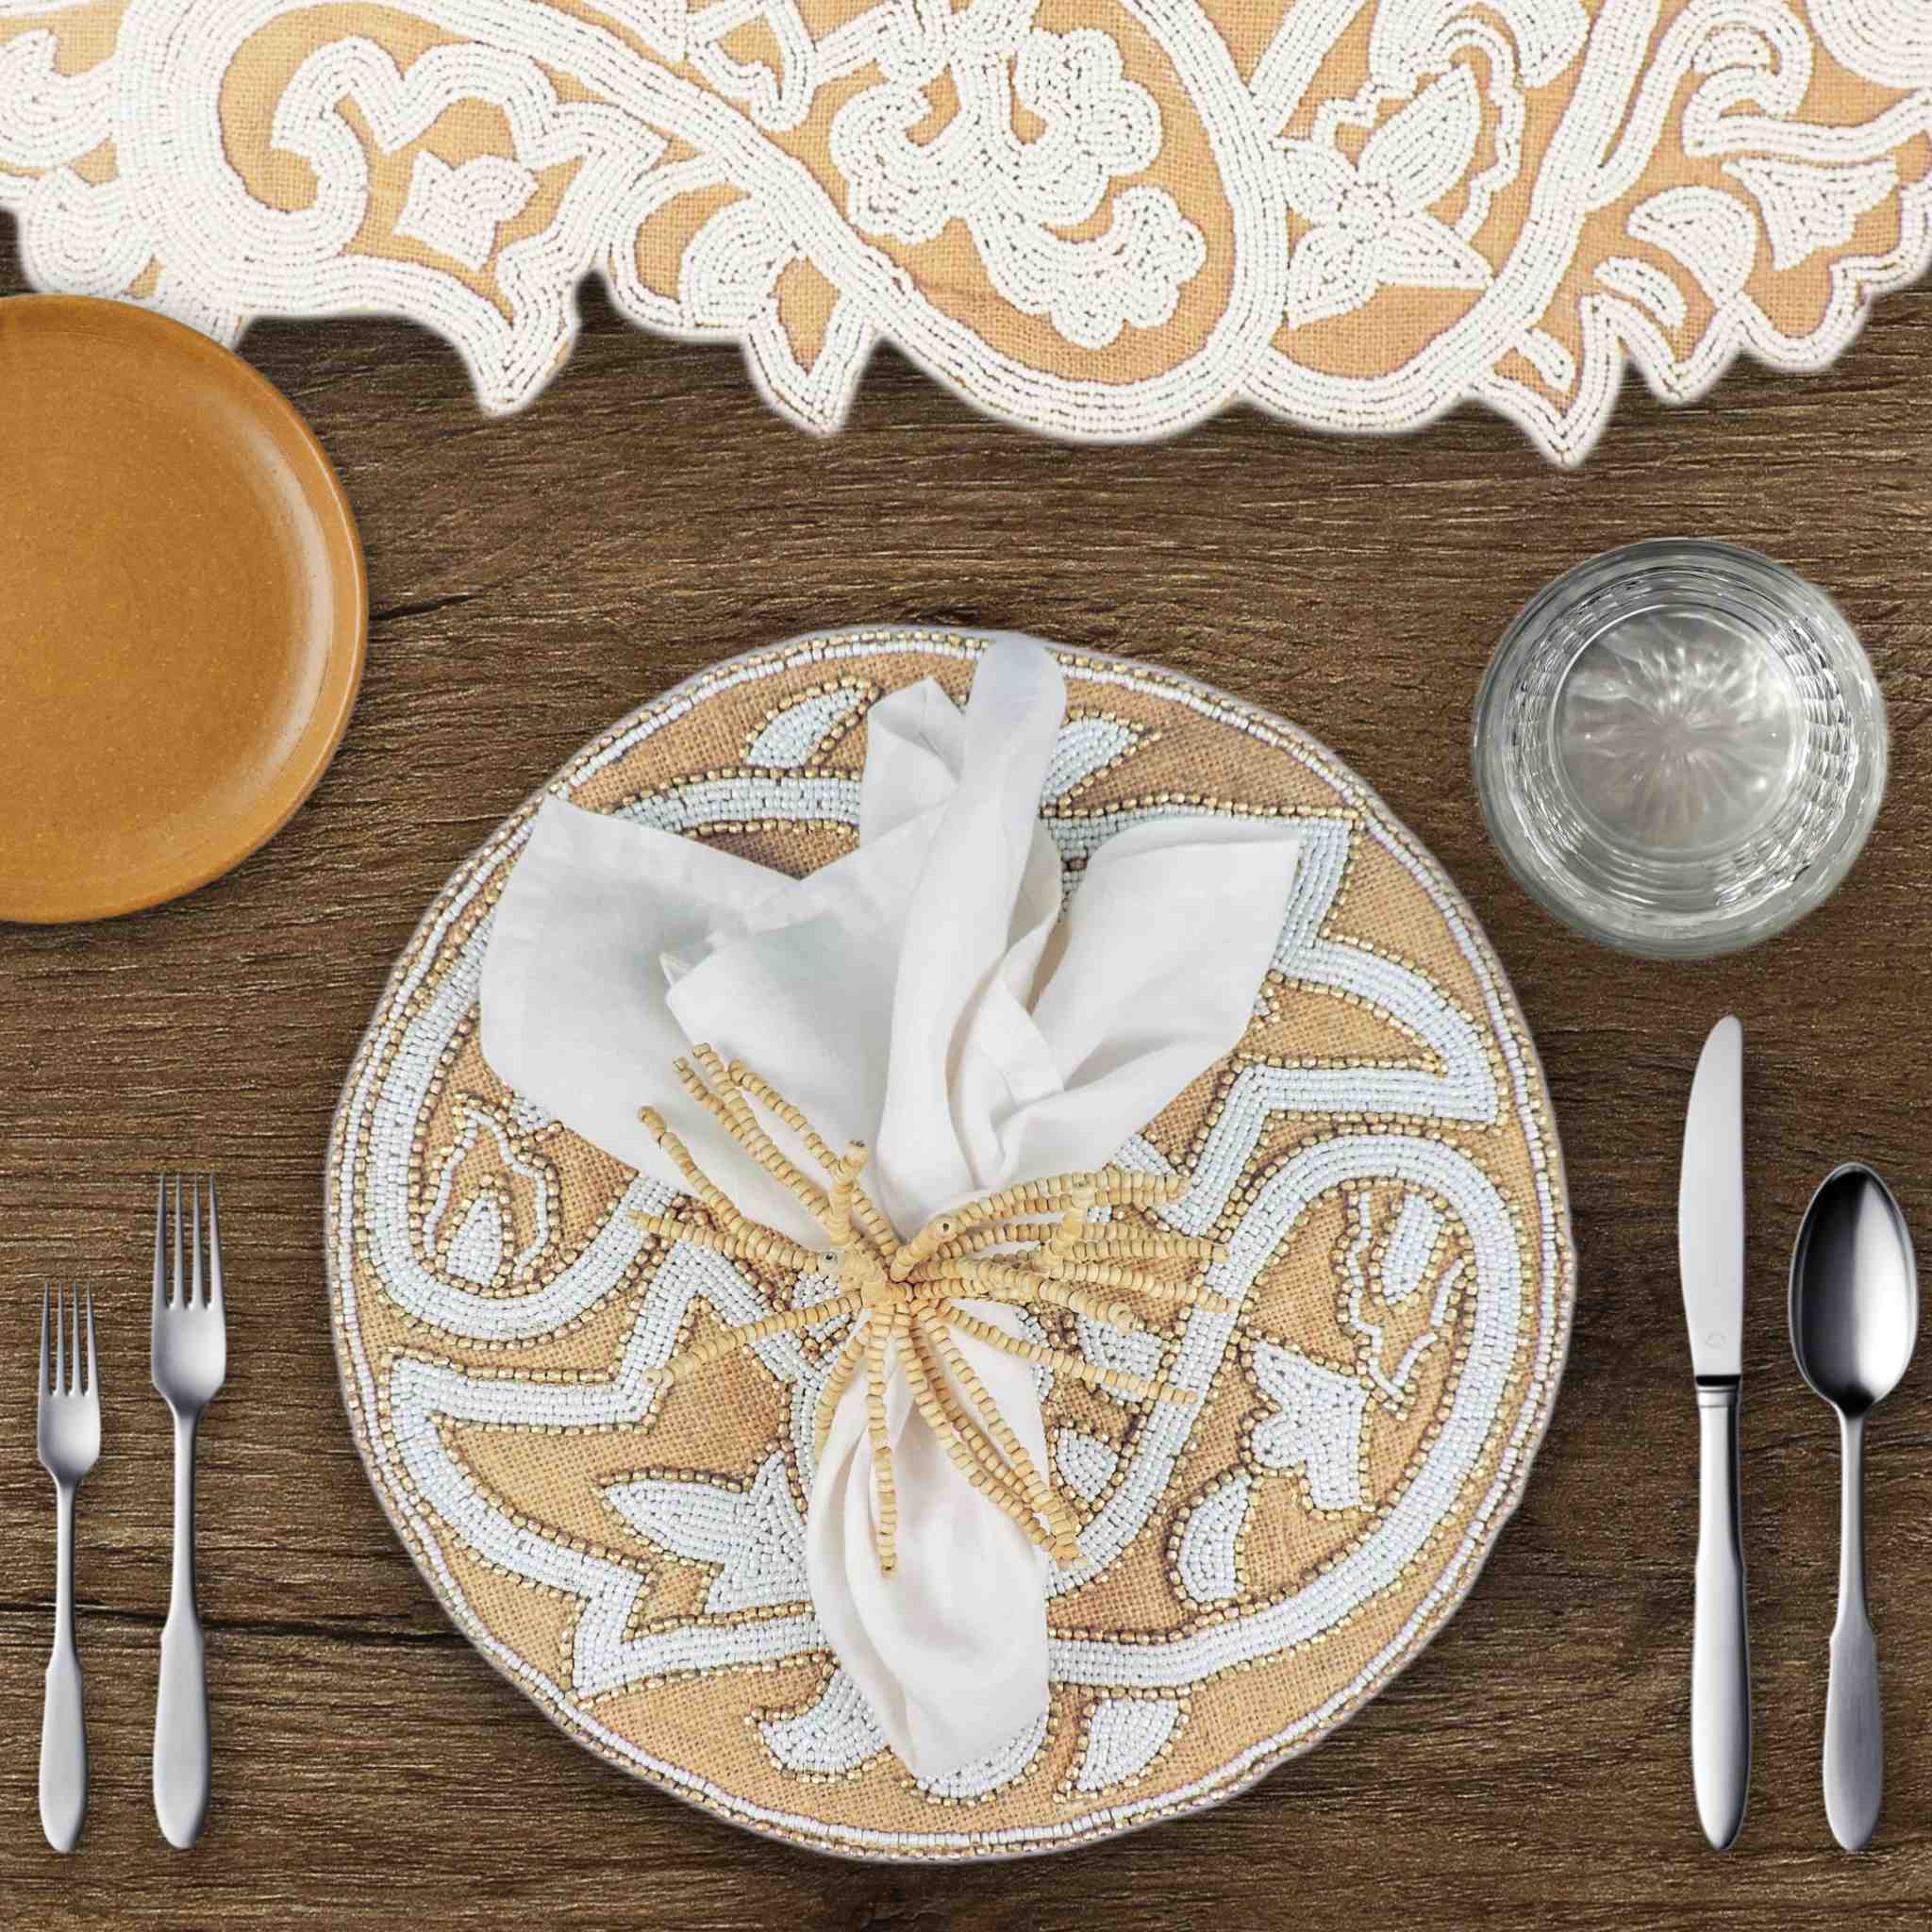 II Pesce Glass Bead Table Setting for 4 - Embroidered Placemats, Napkin Rings & Table Runner in Natural White